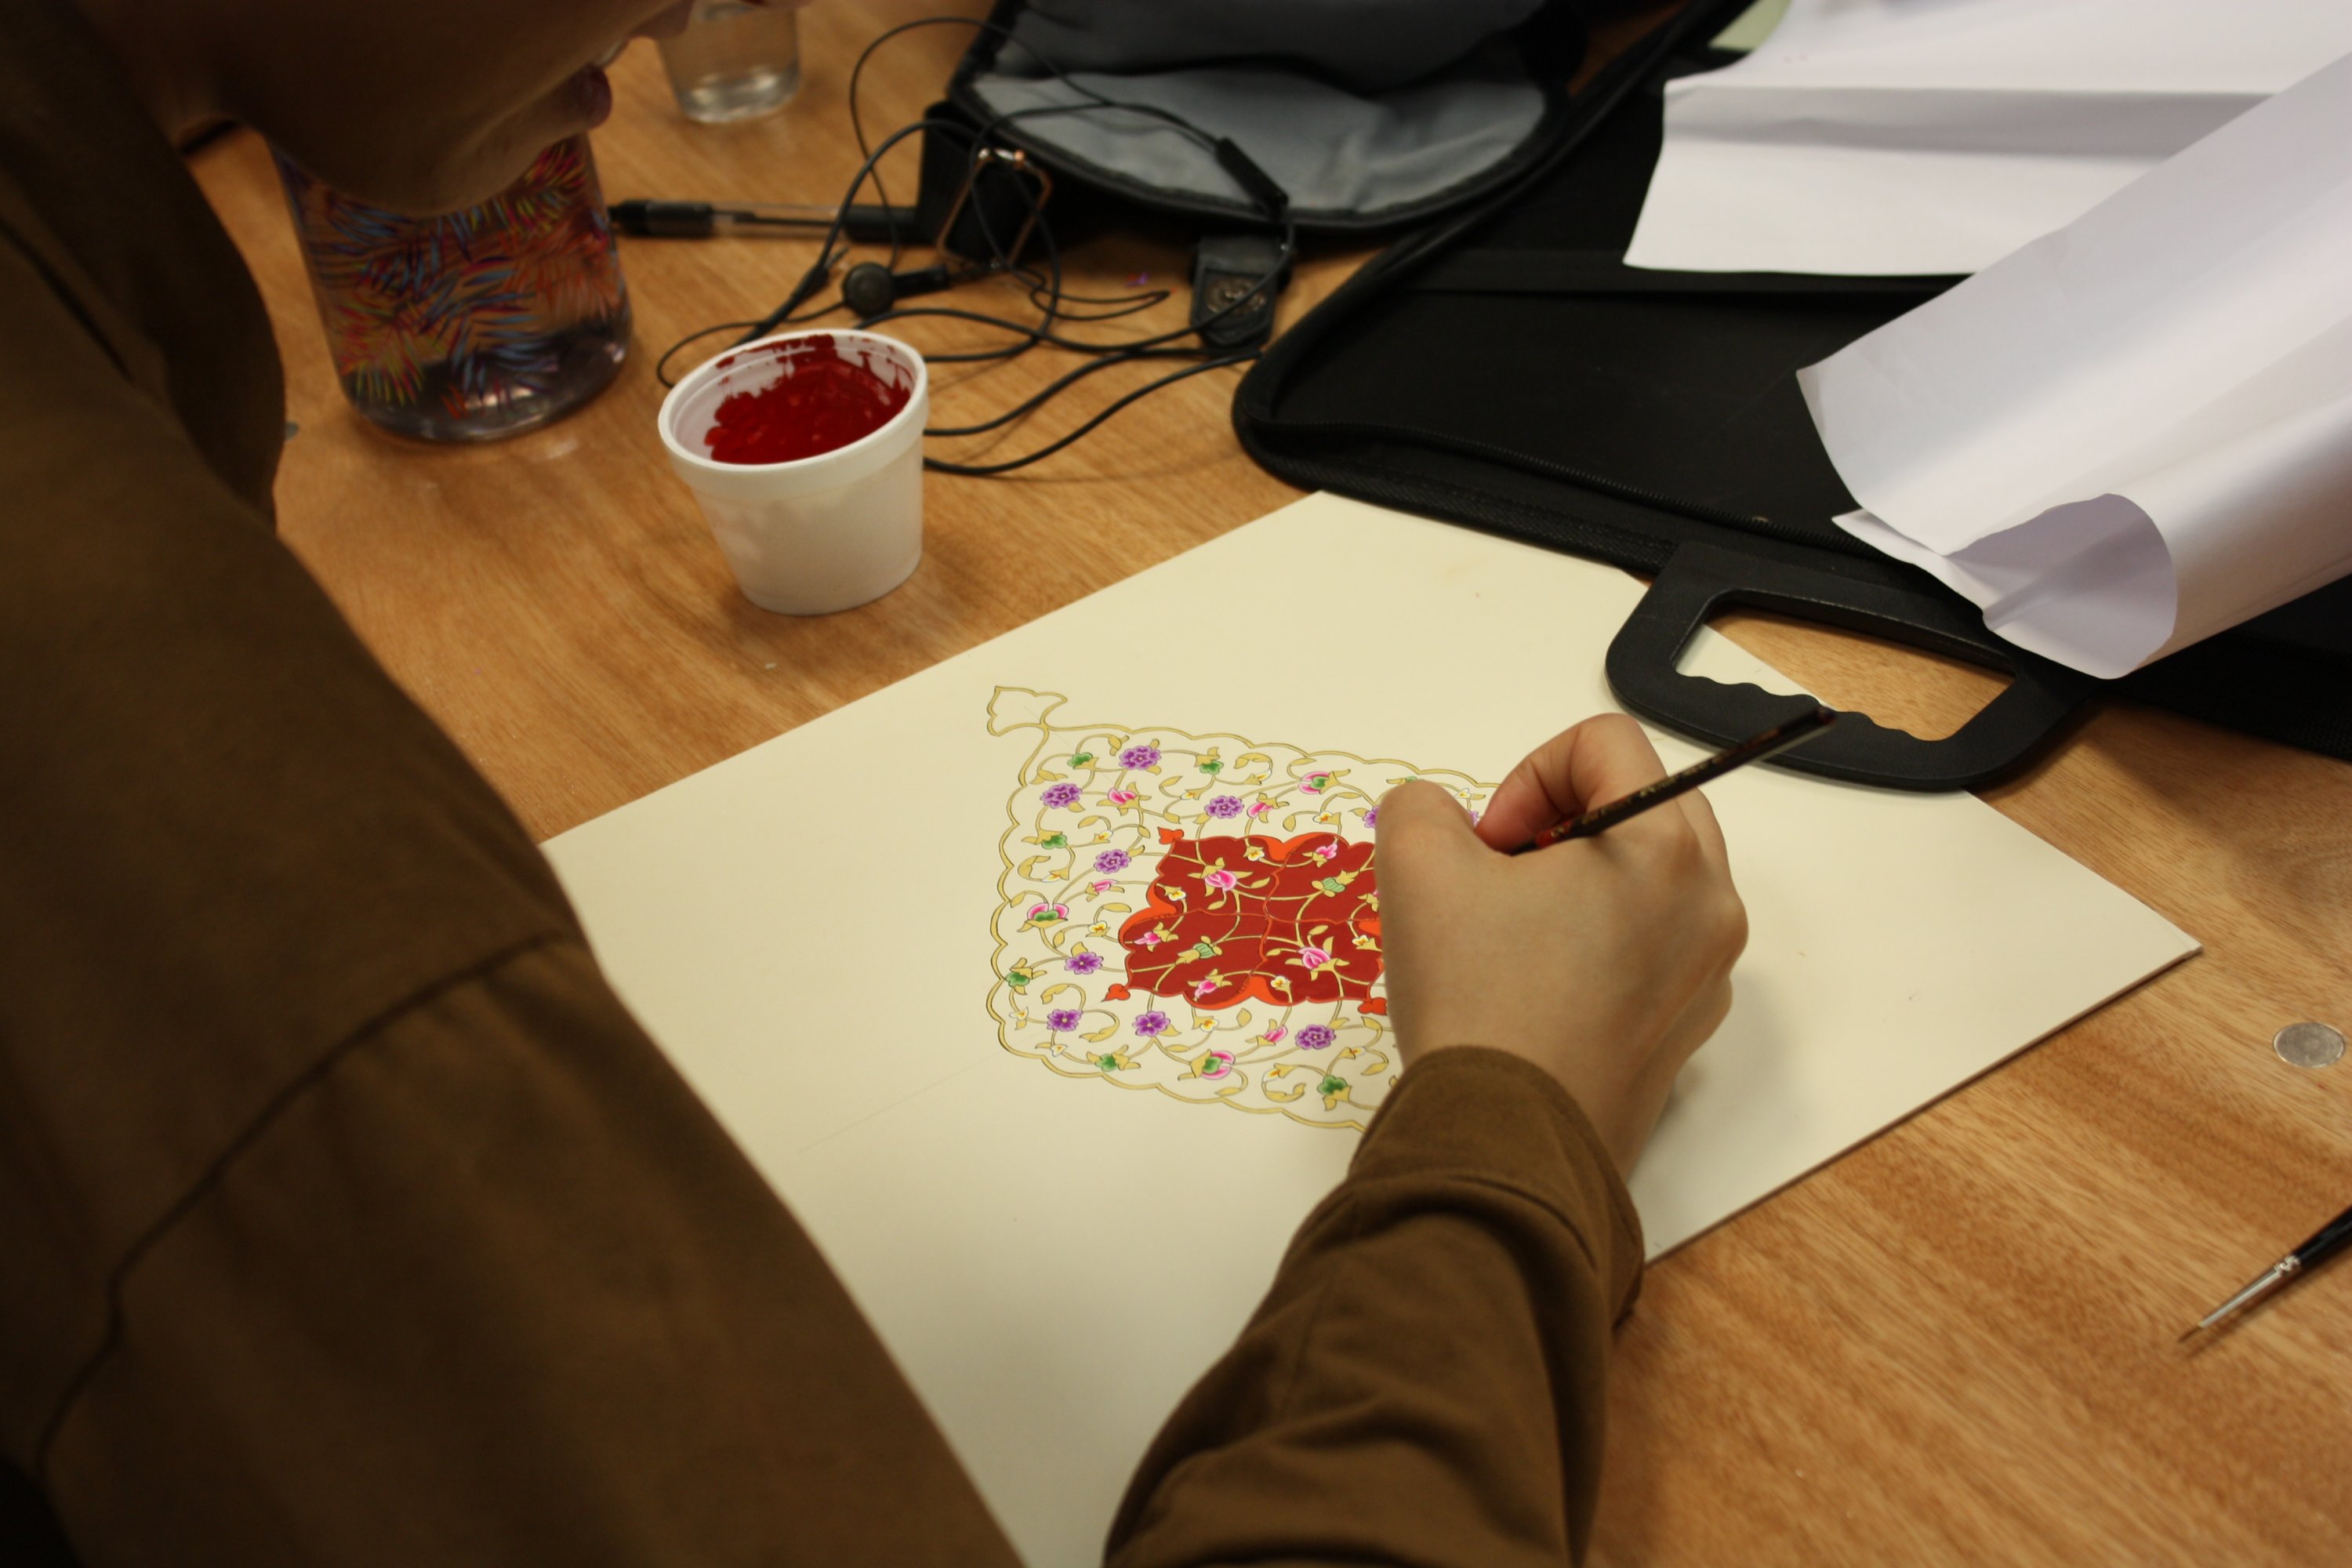 Students practice the art of Tezhip at the Yunus Emre Institute London, in London, UK (Photo courtesy of the Yunus Emre Institute)